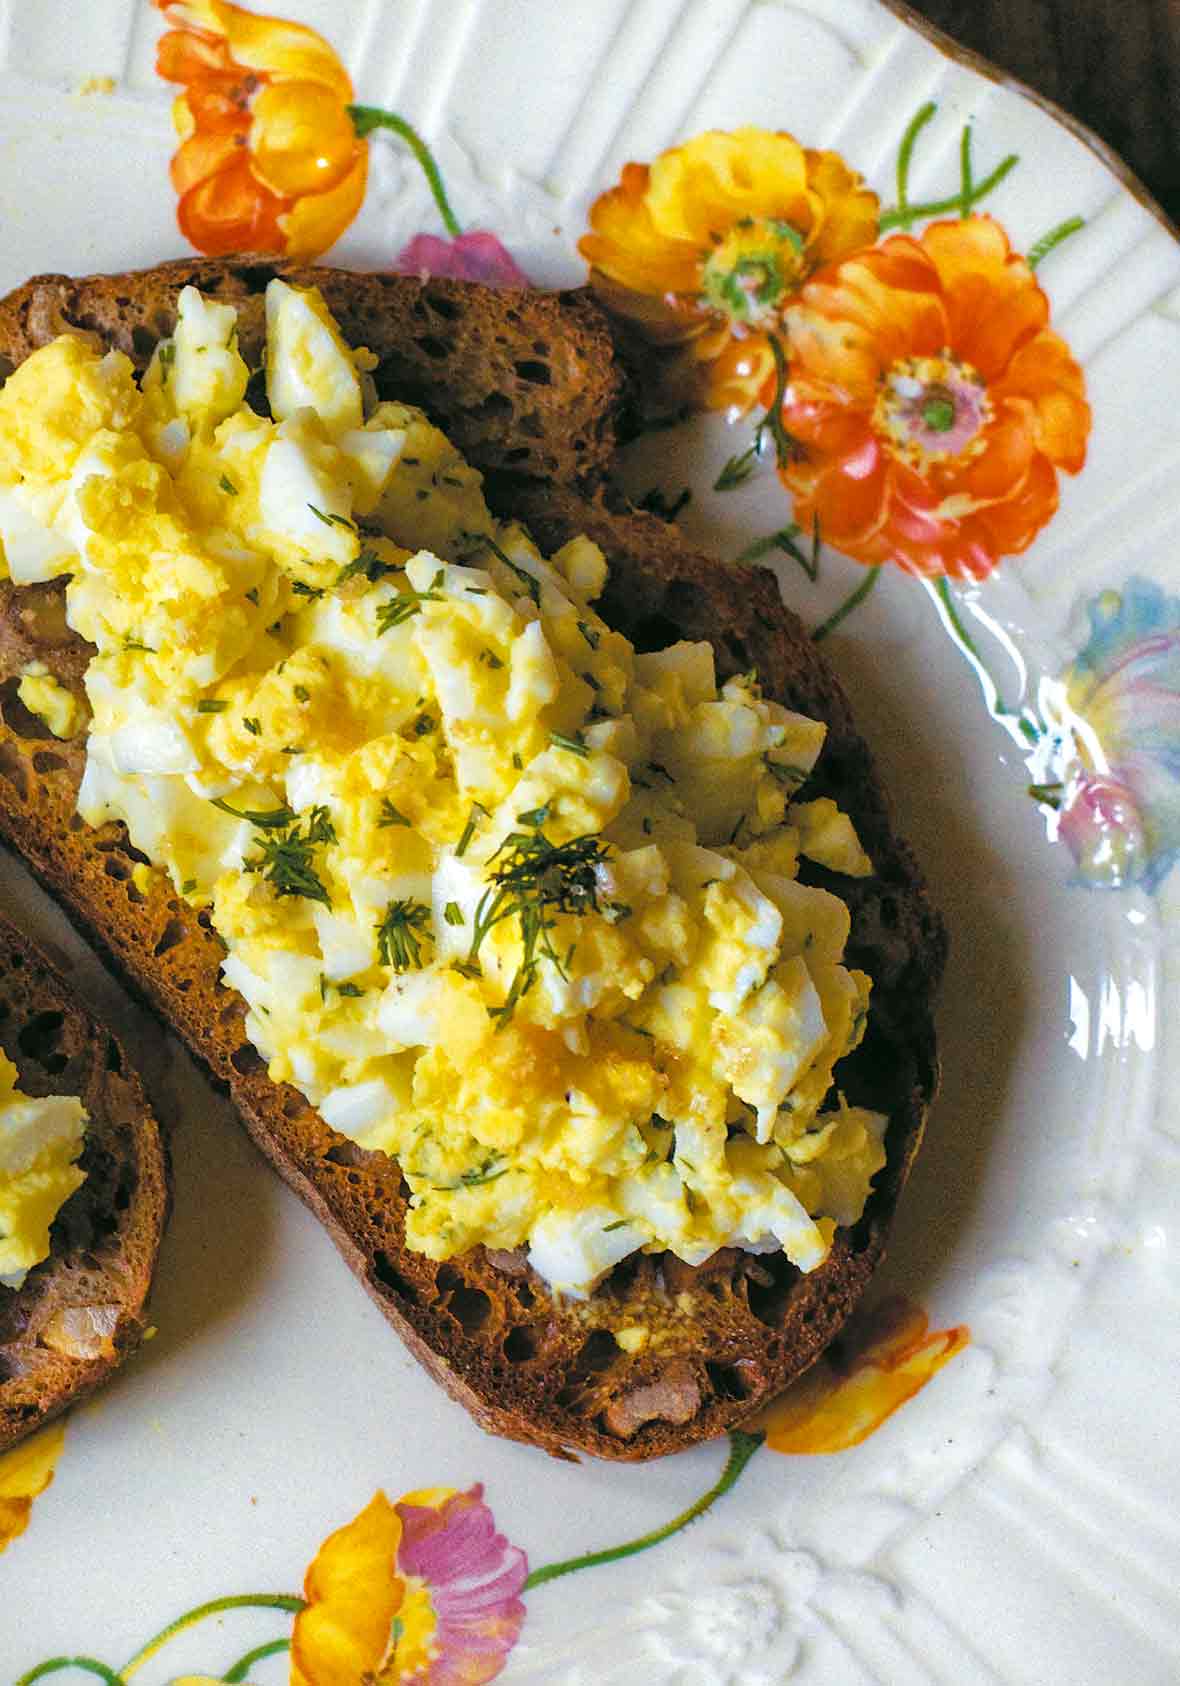 An open face egg salad sandwich on toasted whole wheat